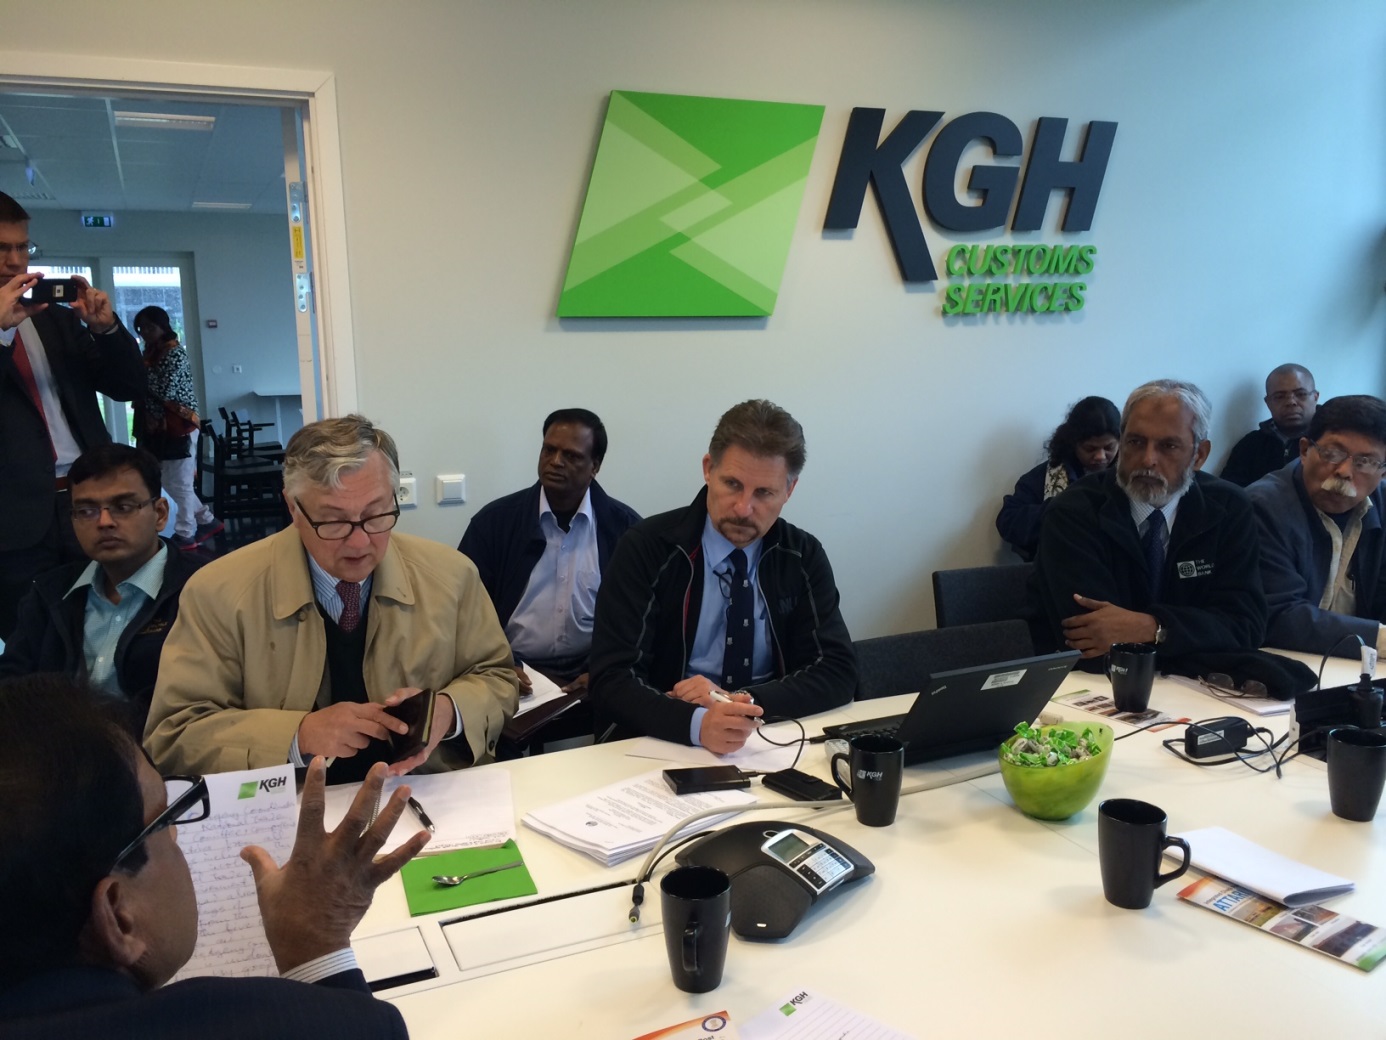 KGH buys the German advisory and consulting company AOB